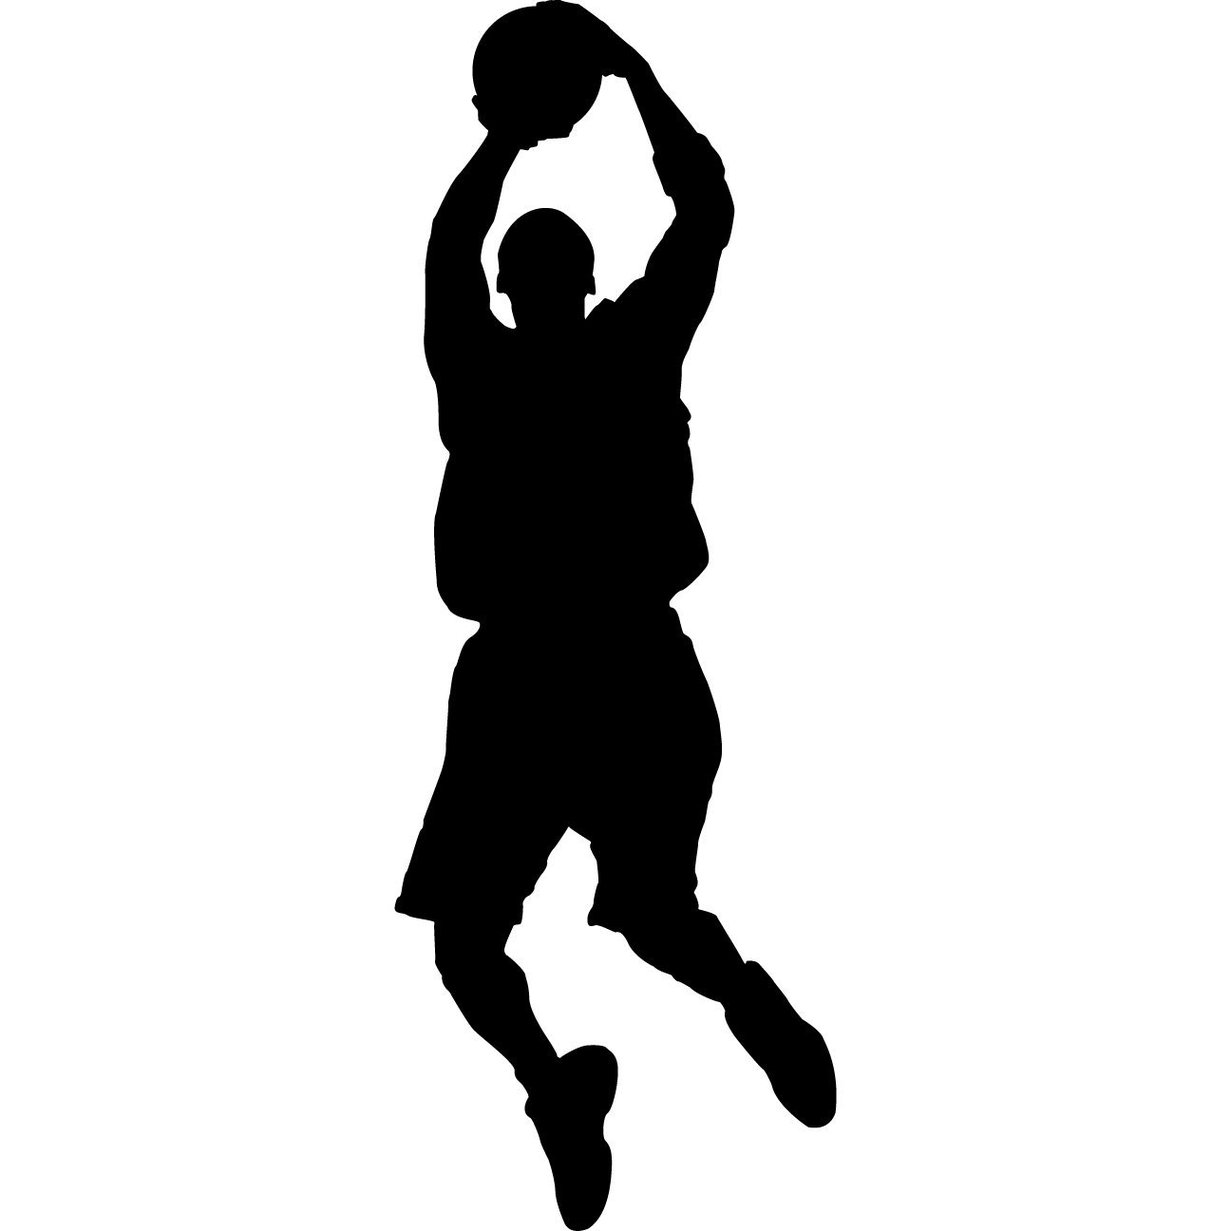 Free Basketball Player Silhouette Png, Download Free Basketball Player ...